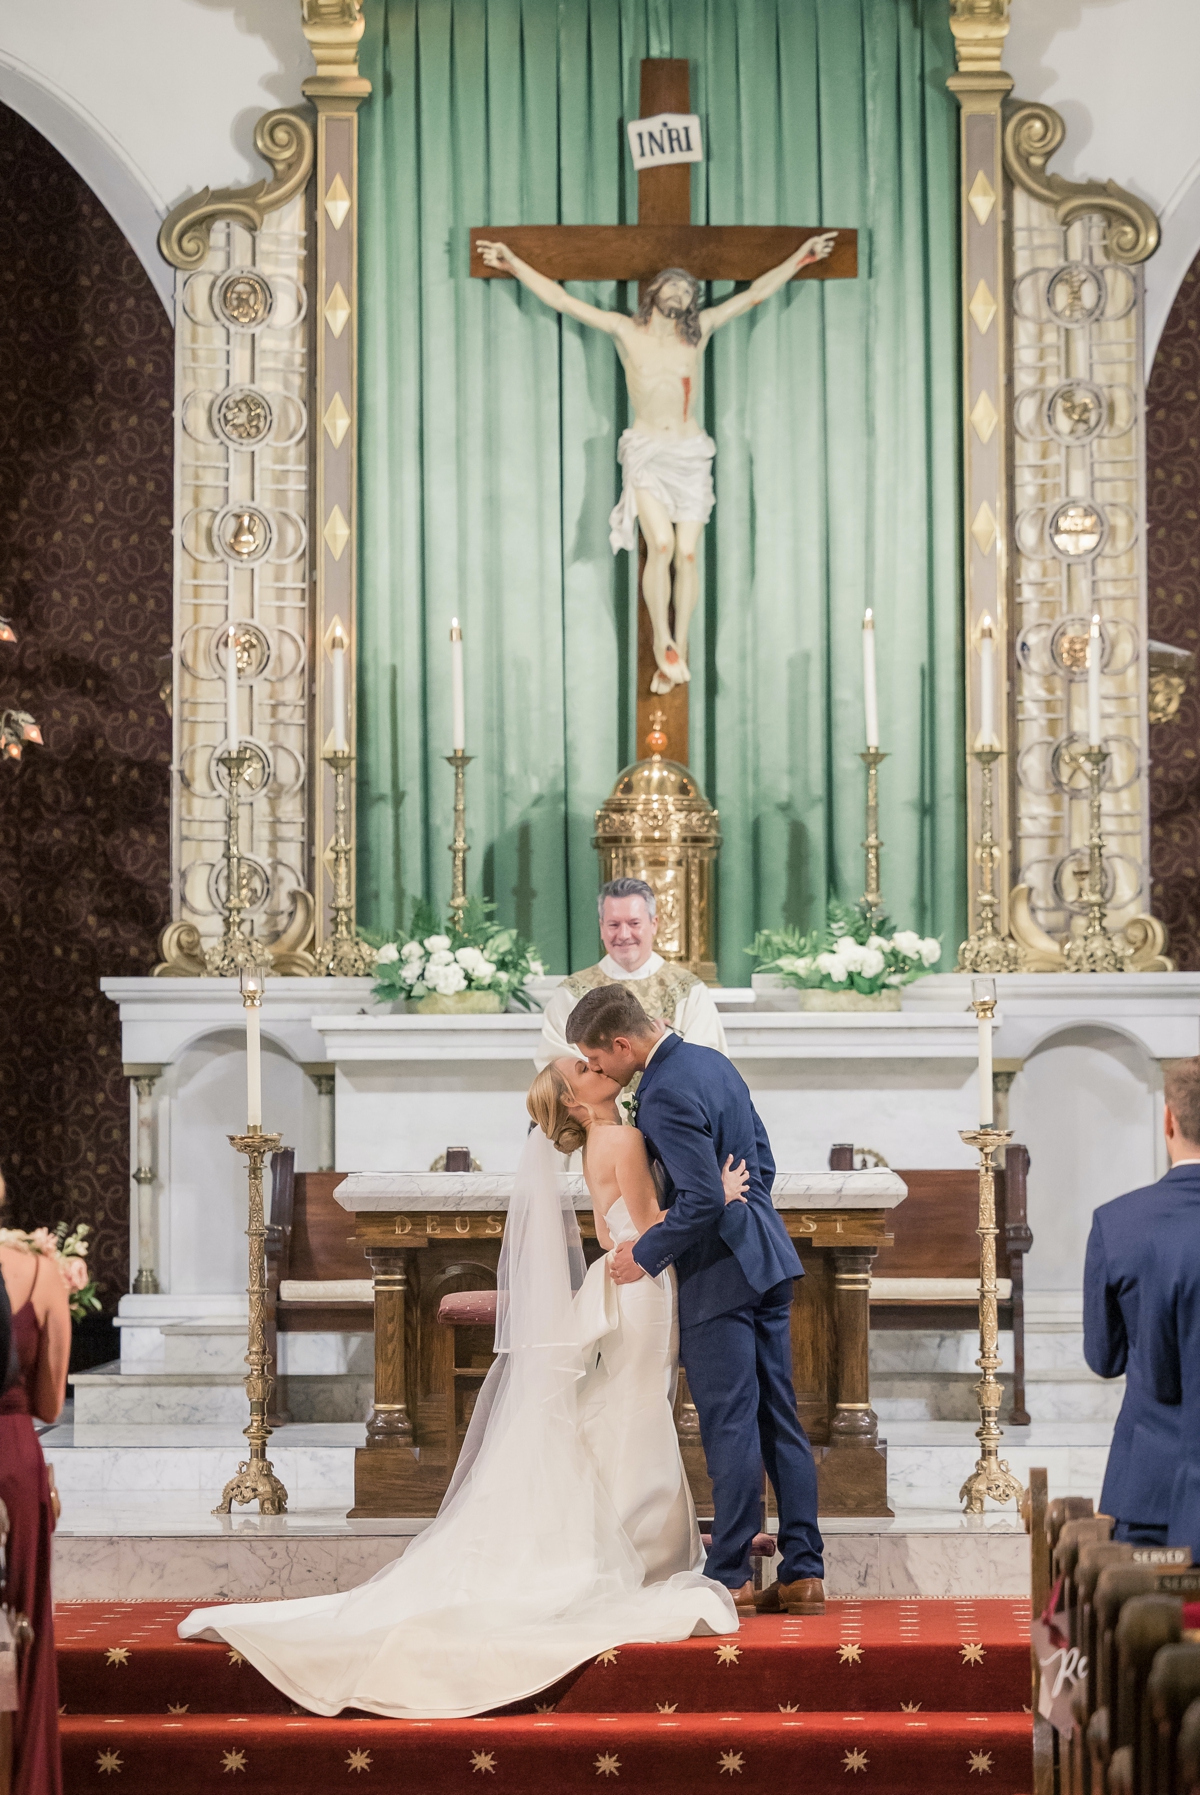 Rebecca and Josh kissing for the first time as husband and wife at the altar of a Catholic Church on their wedding day.